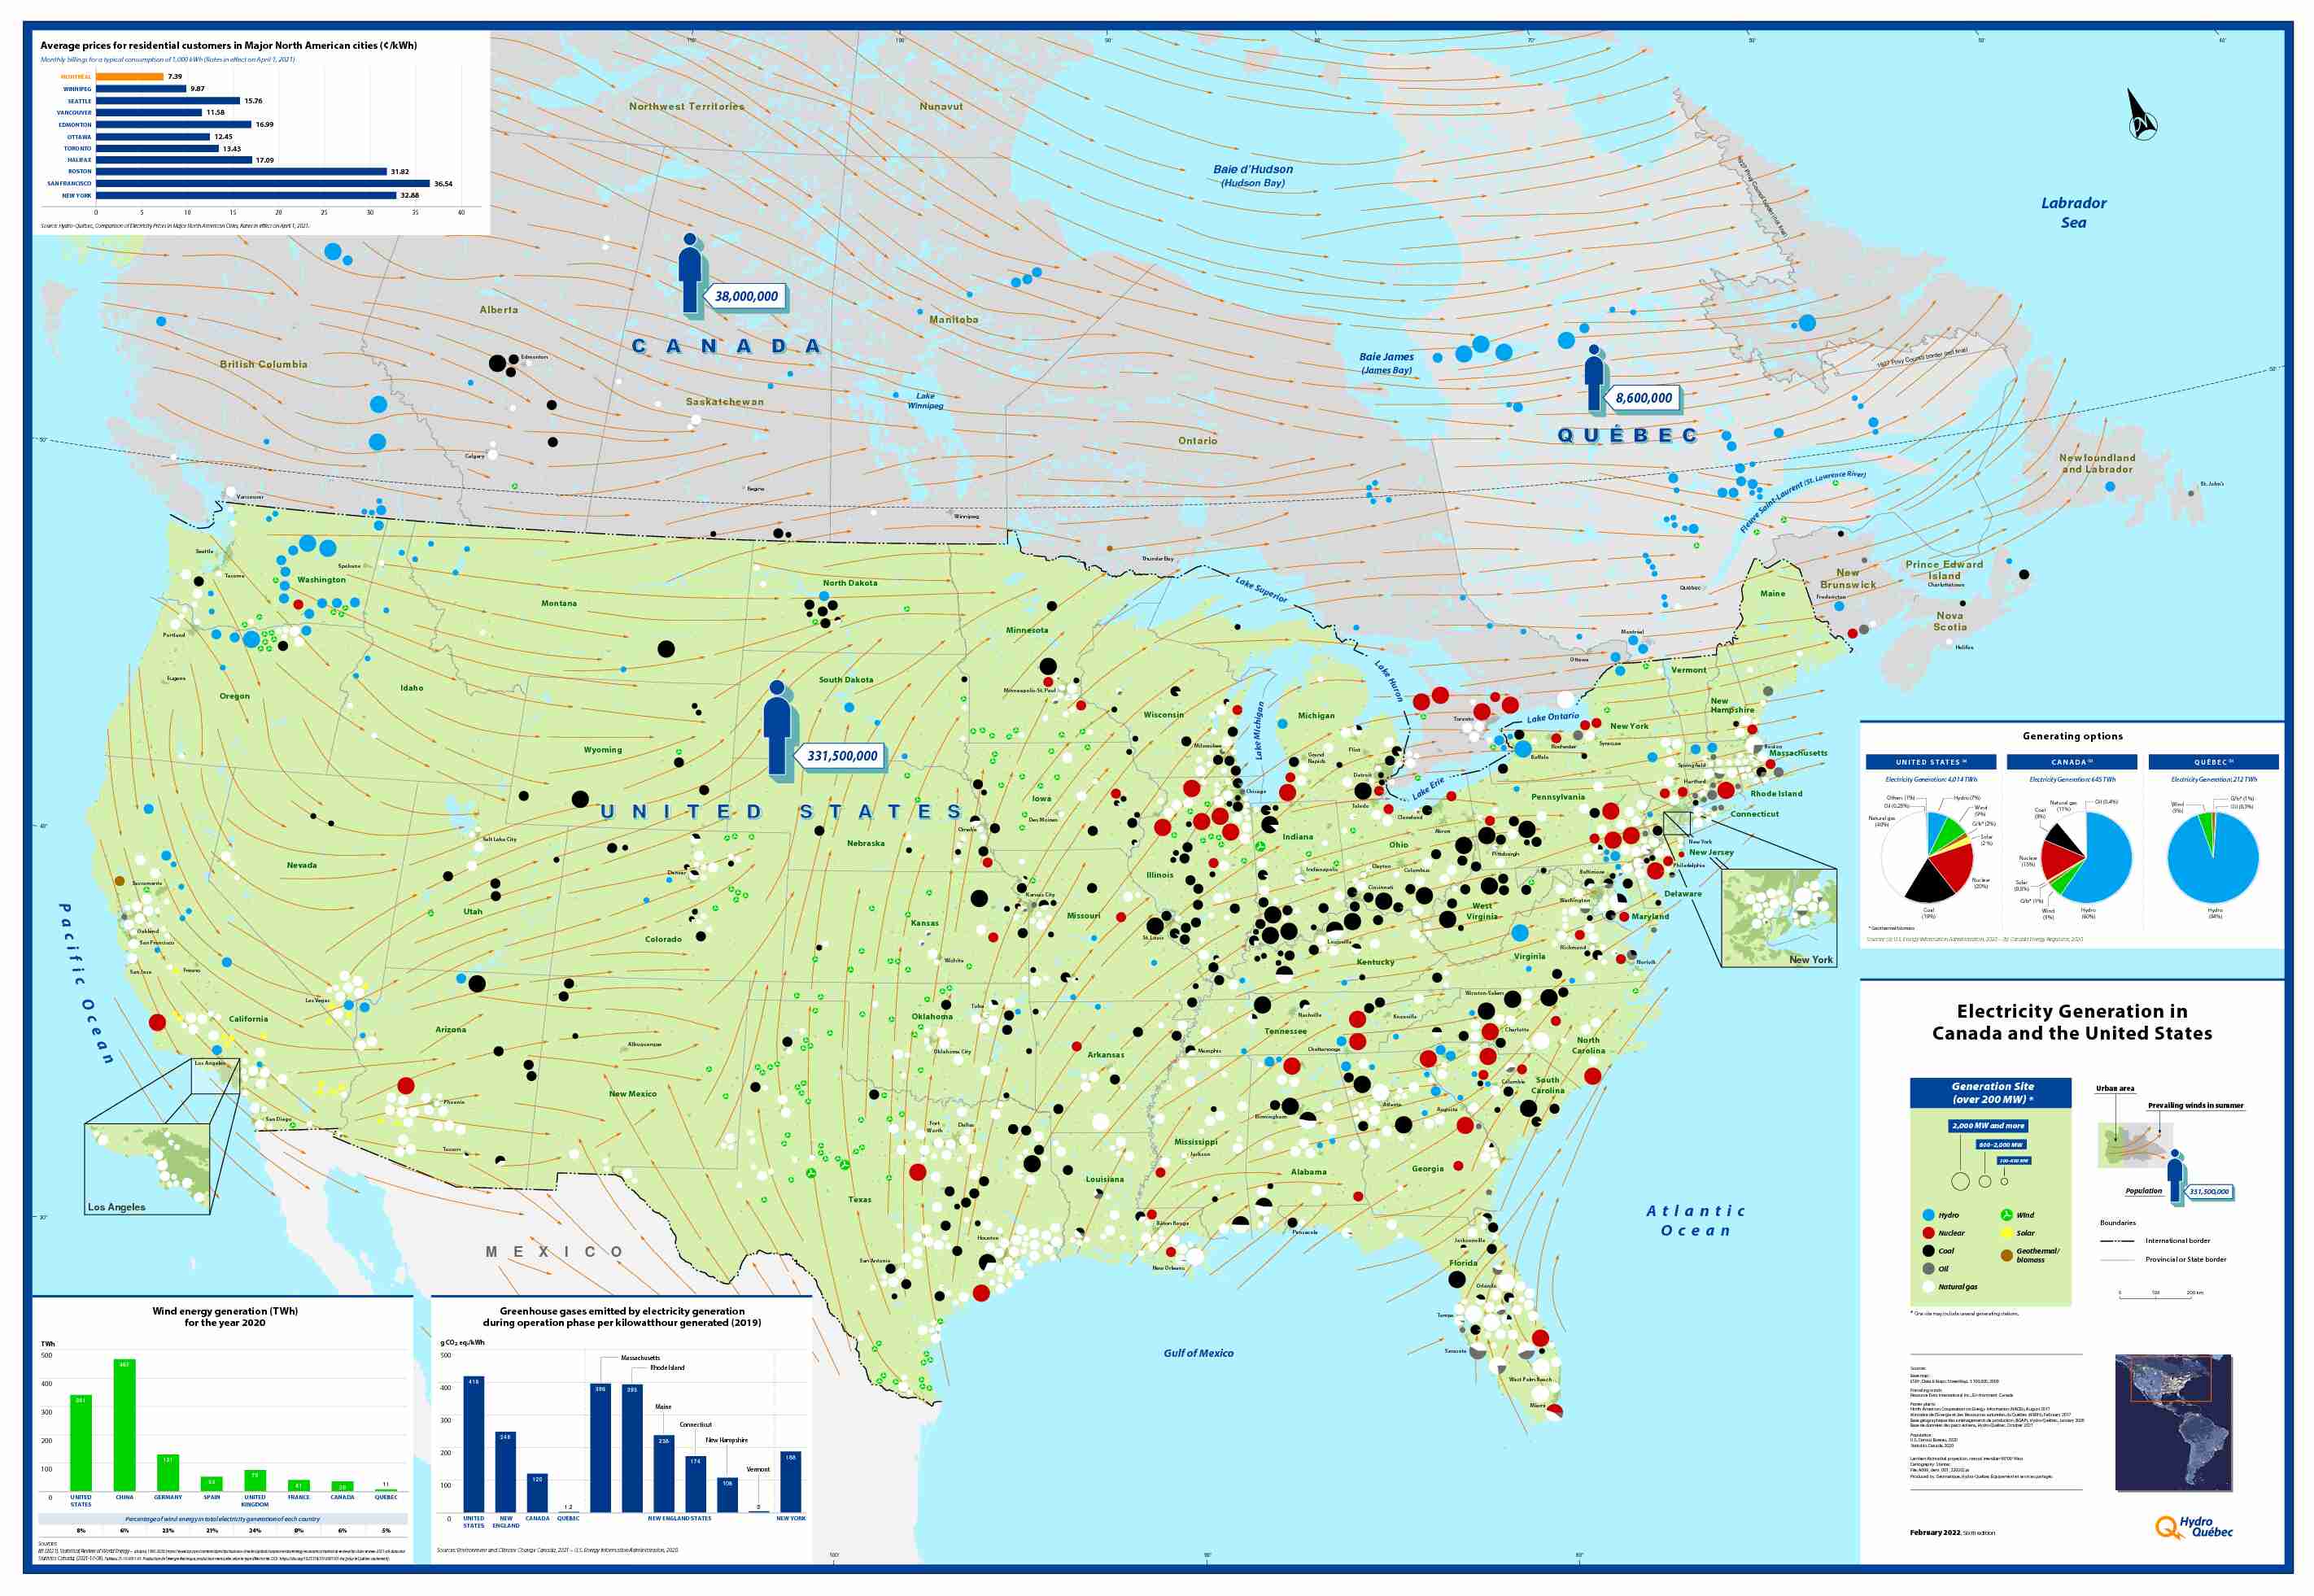 Electricity Generation in Canada and the United States - February